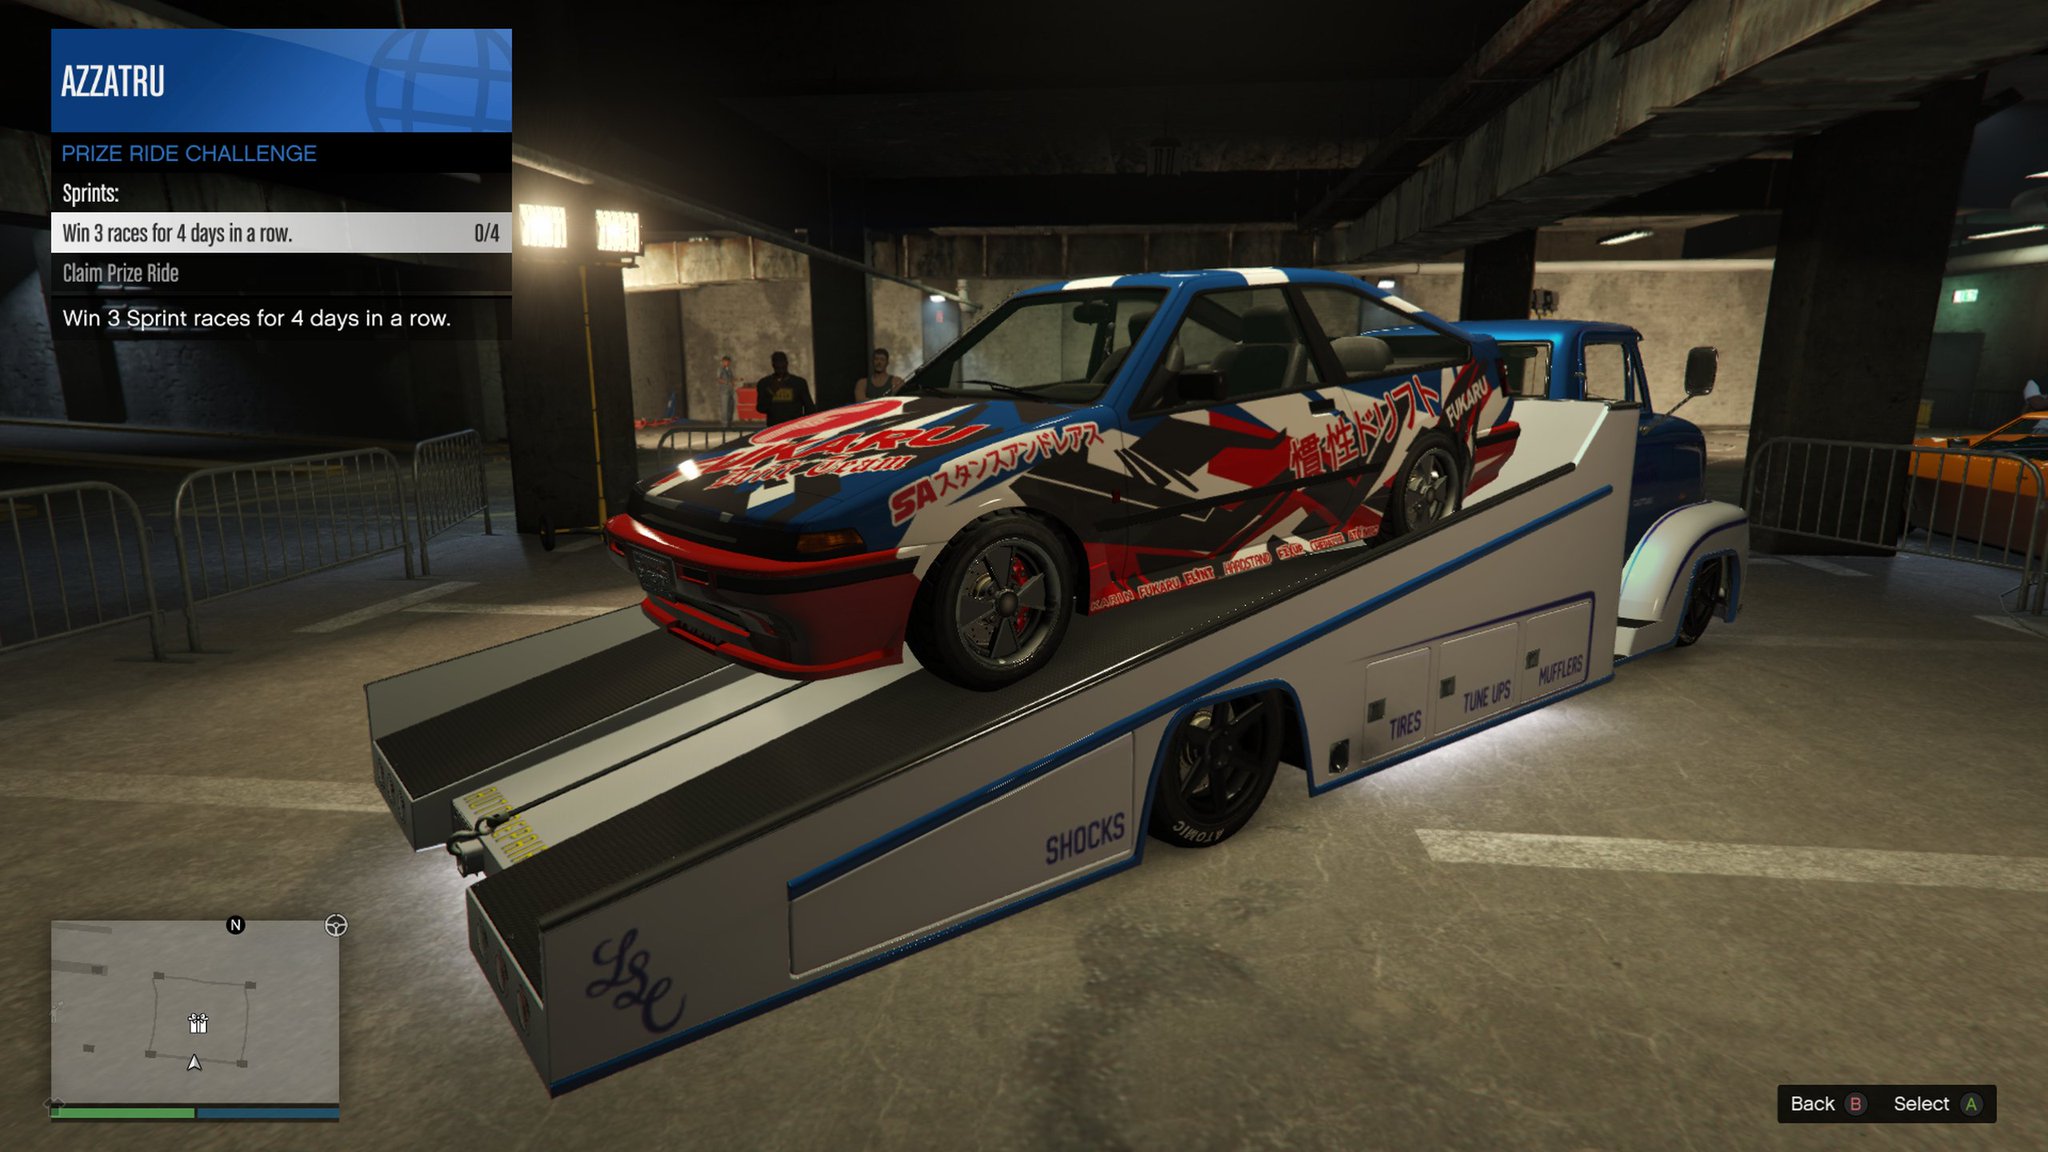 Gta News Rockstarintel Com The Latest Prize Ride Challenge Vehicle Is The Karin Futo Gtx Worth 1 192 500 Win 3 Sprint Races For 4 Days In A Row To Receive It